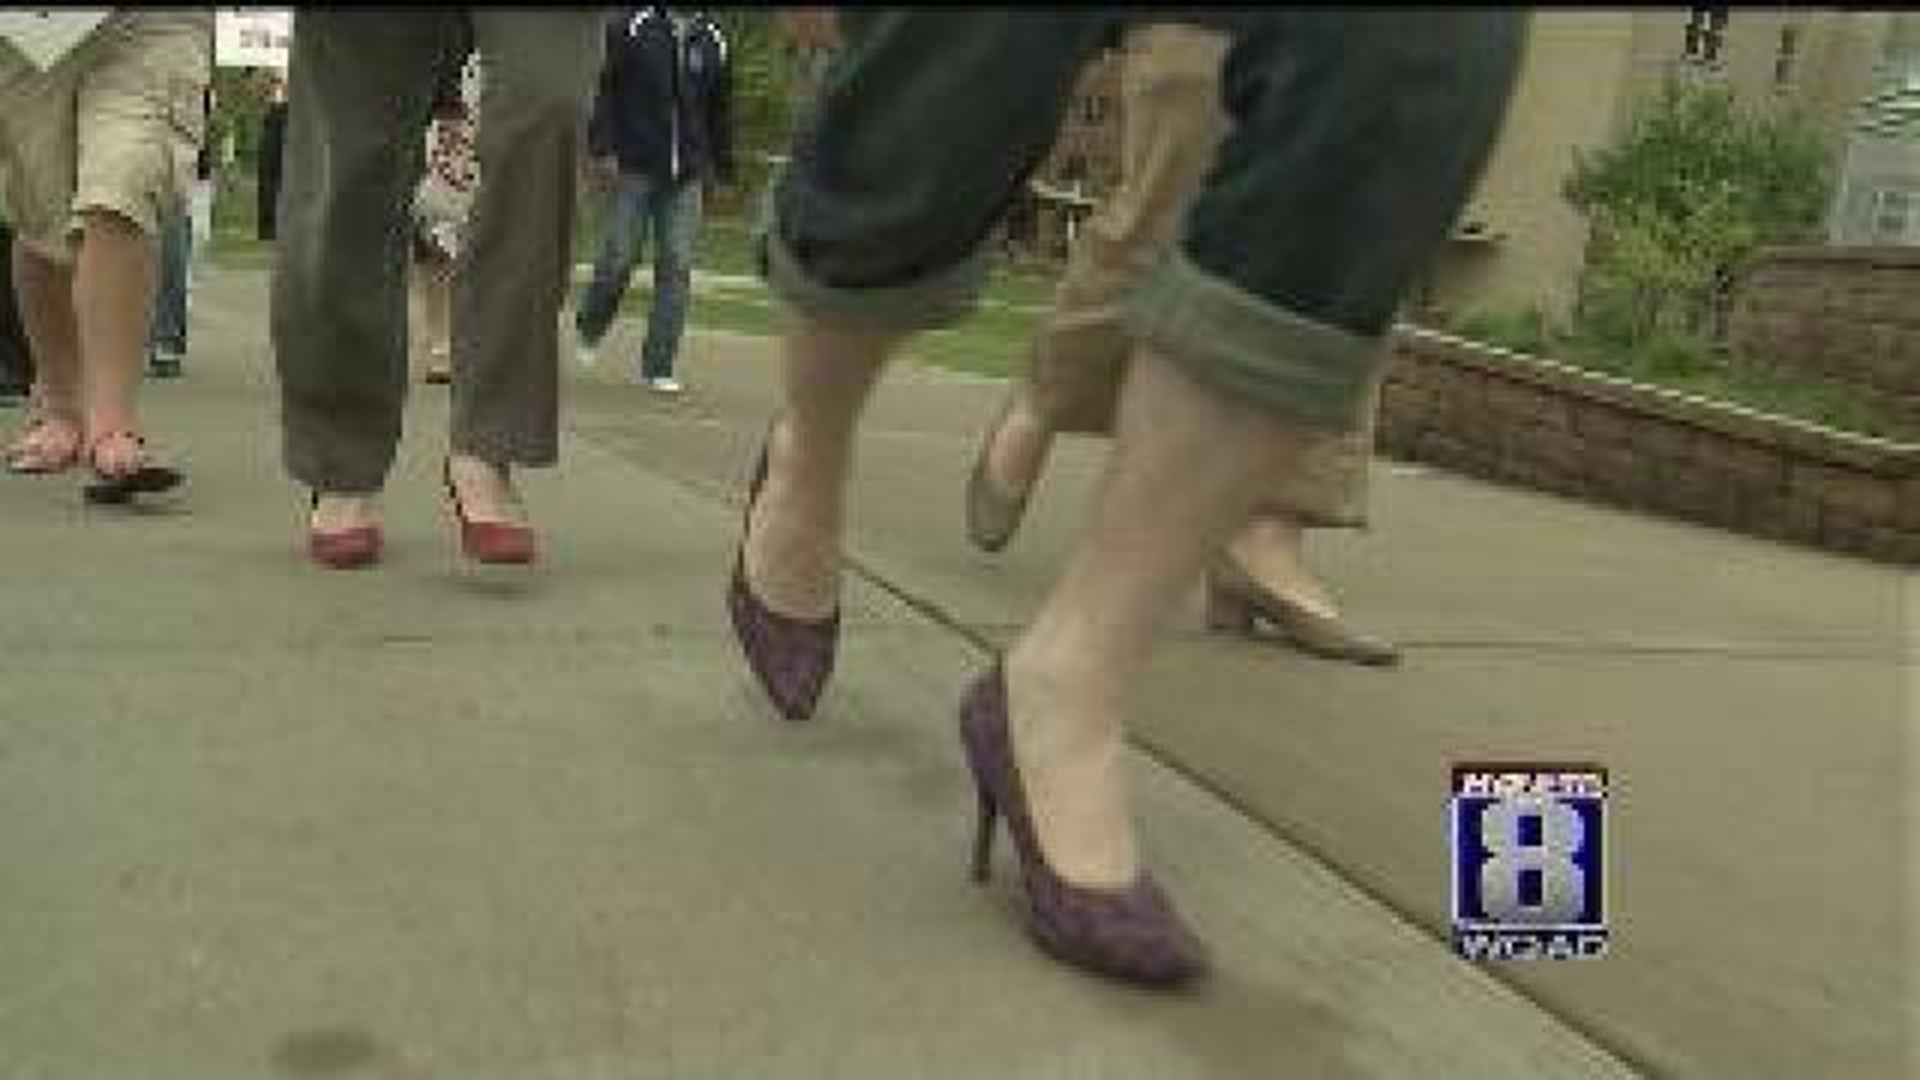 St. Ambrose Walk a Mile In Her Shoes event